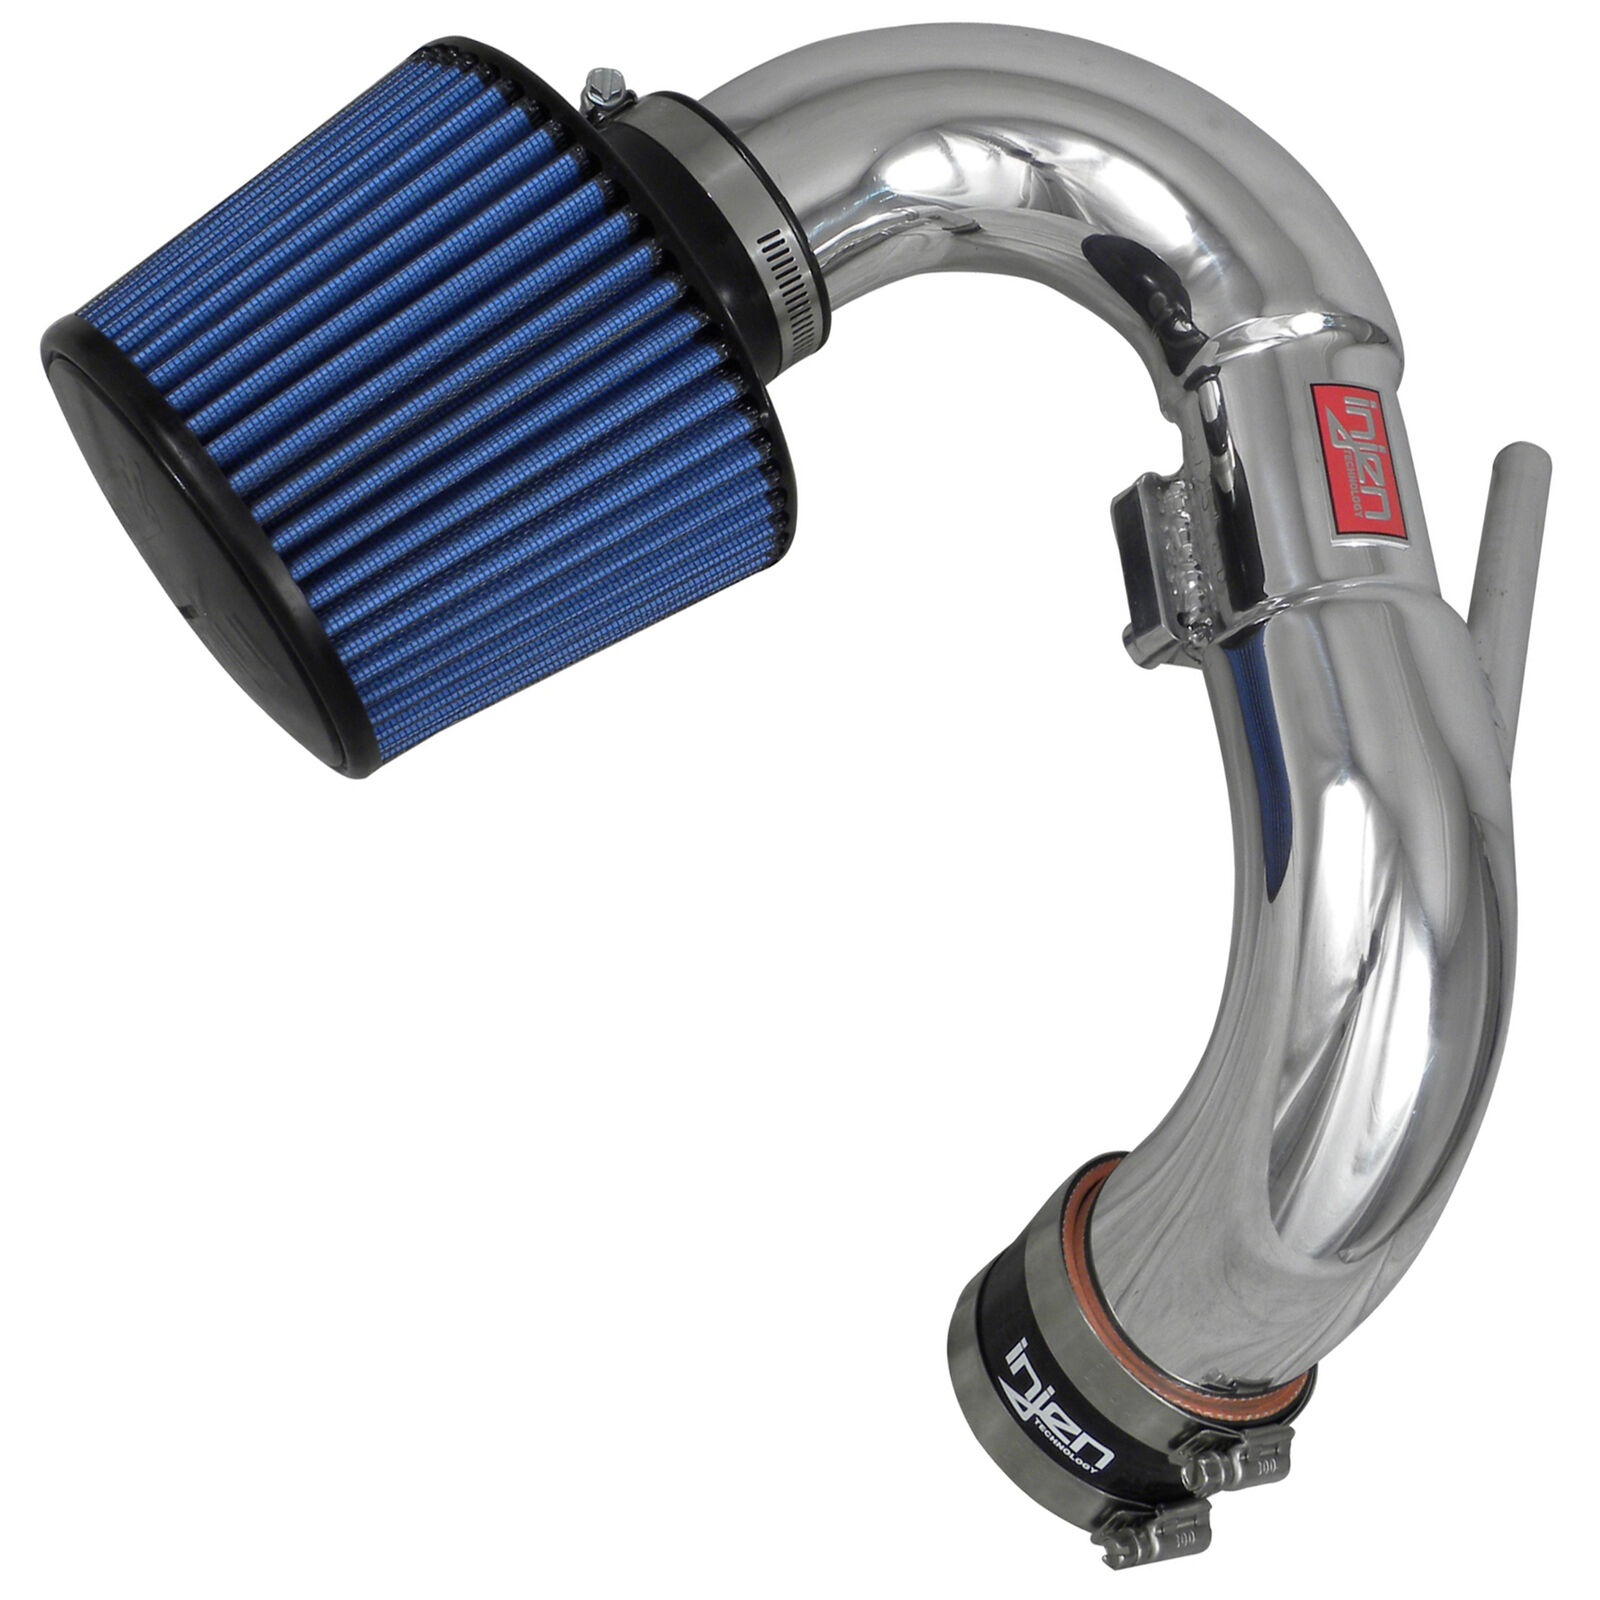 Injen SP2090P Cold Air Intake System for 10-17 Toyota Prius / 11-13 CT 200H 1.8L